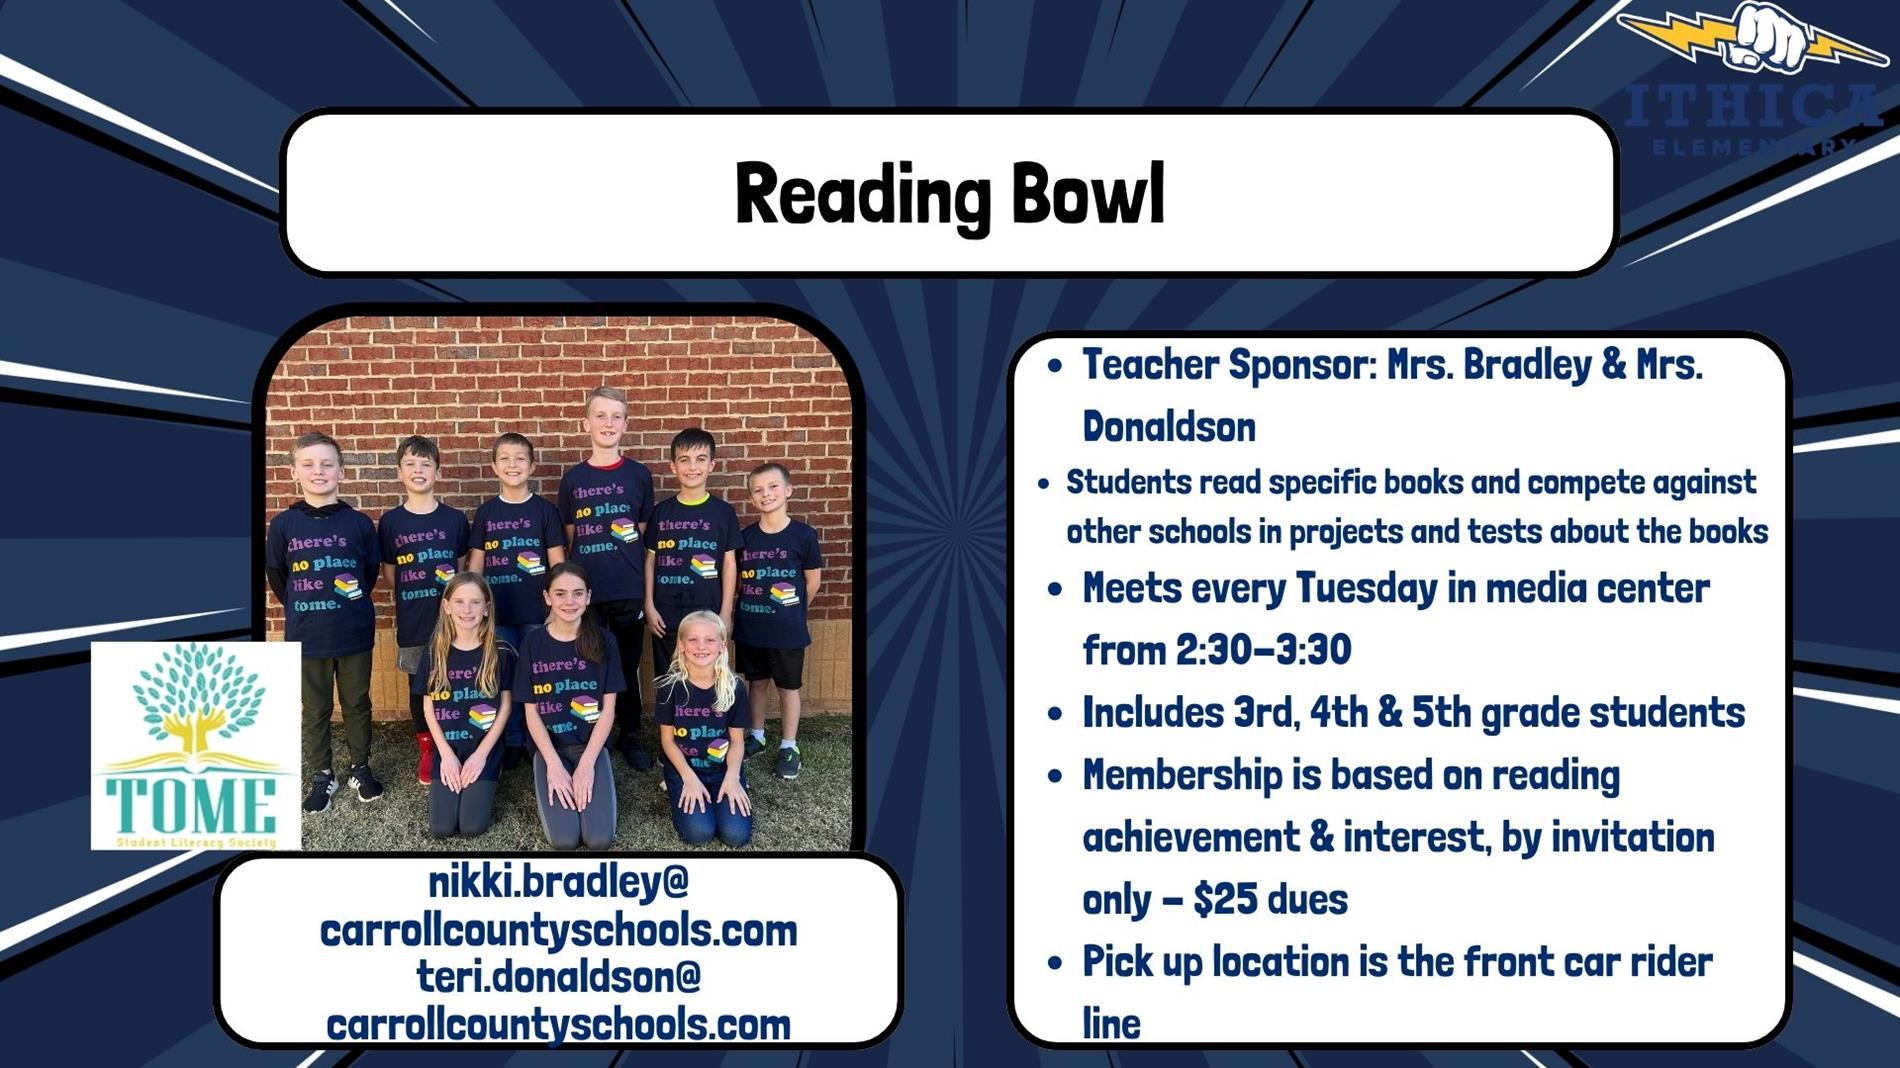 information about the reading bowl team